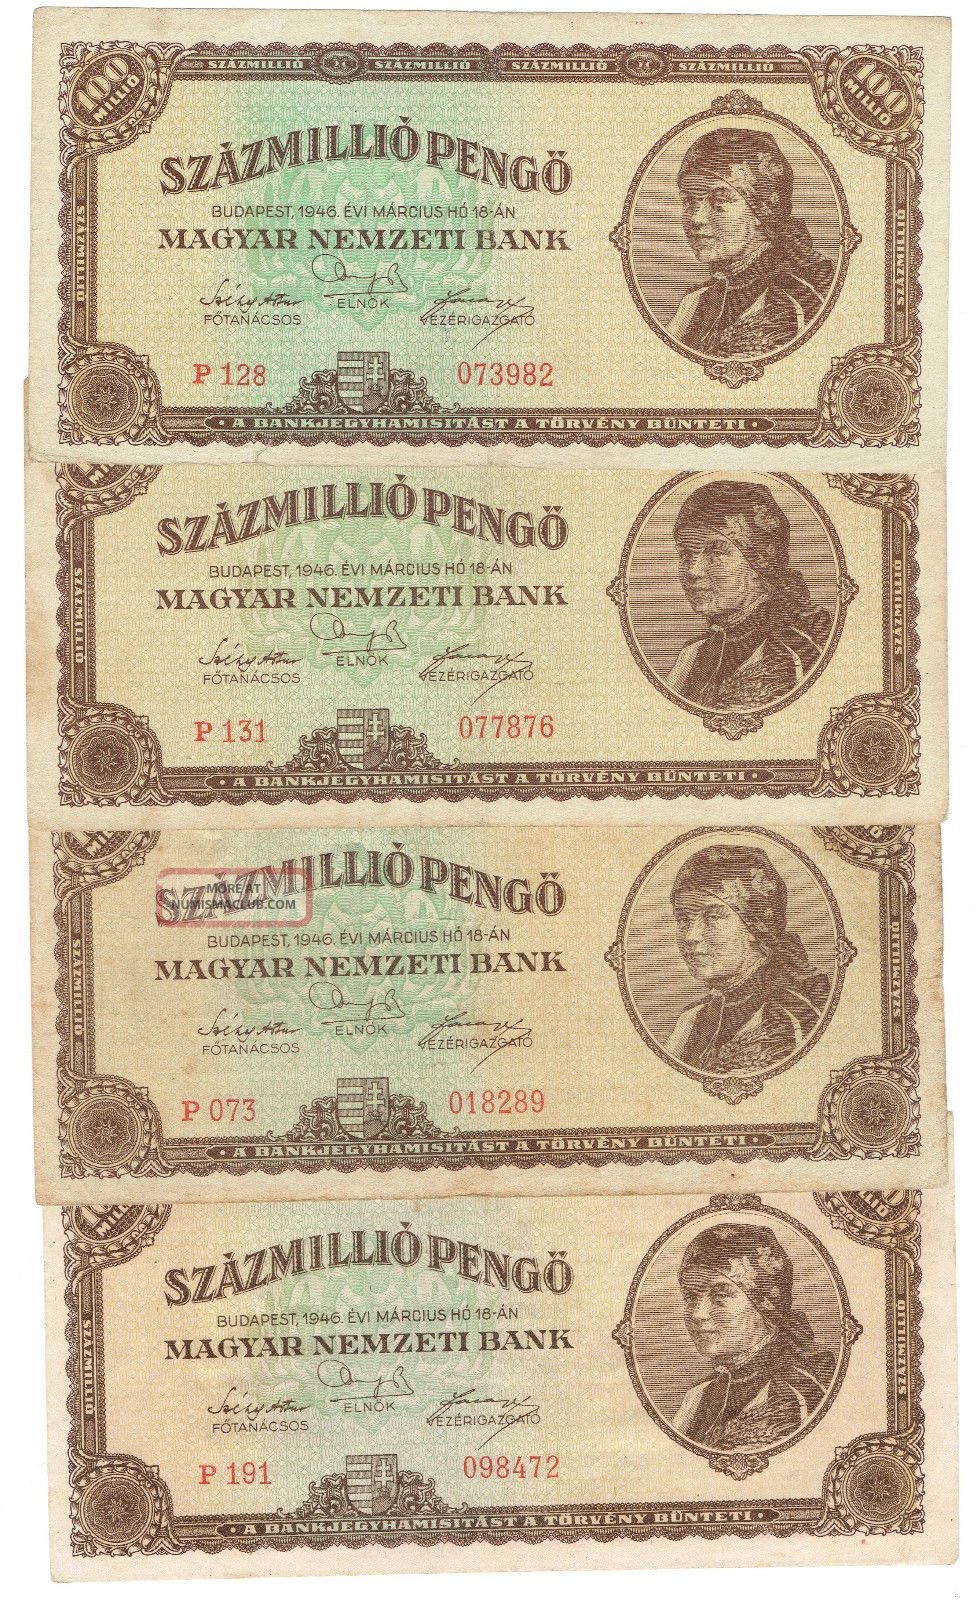 Hungary 100 Million / Pengo Note,  1946 P124 Old World Currency (r) Europe photo